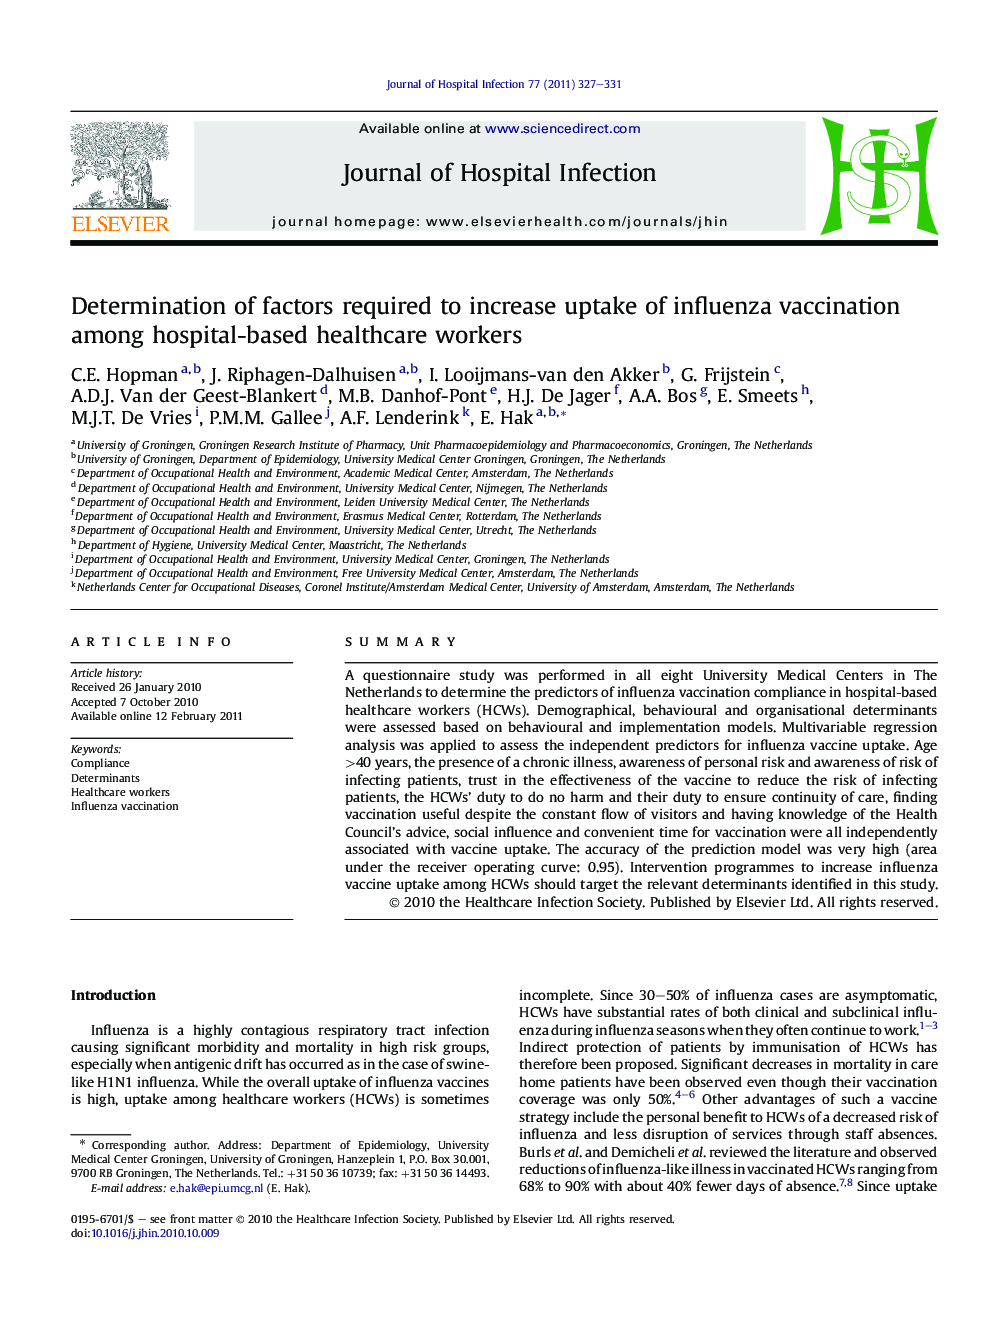 Determination of factors required to increase uptake of influenza vaccination among hospital-based healthcare workers